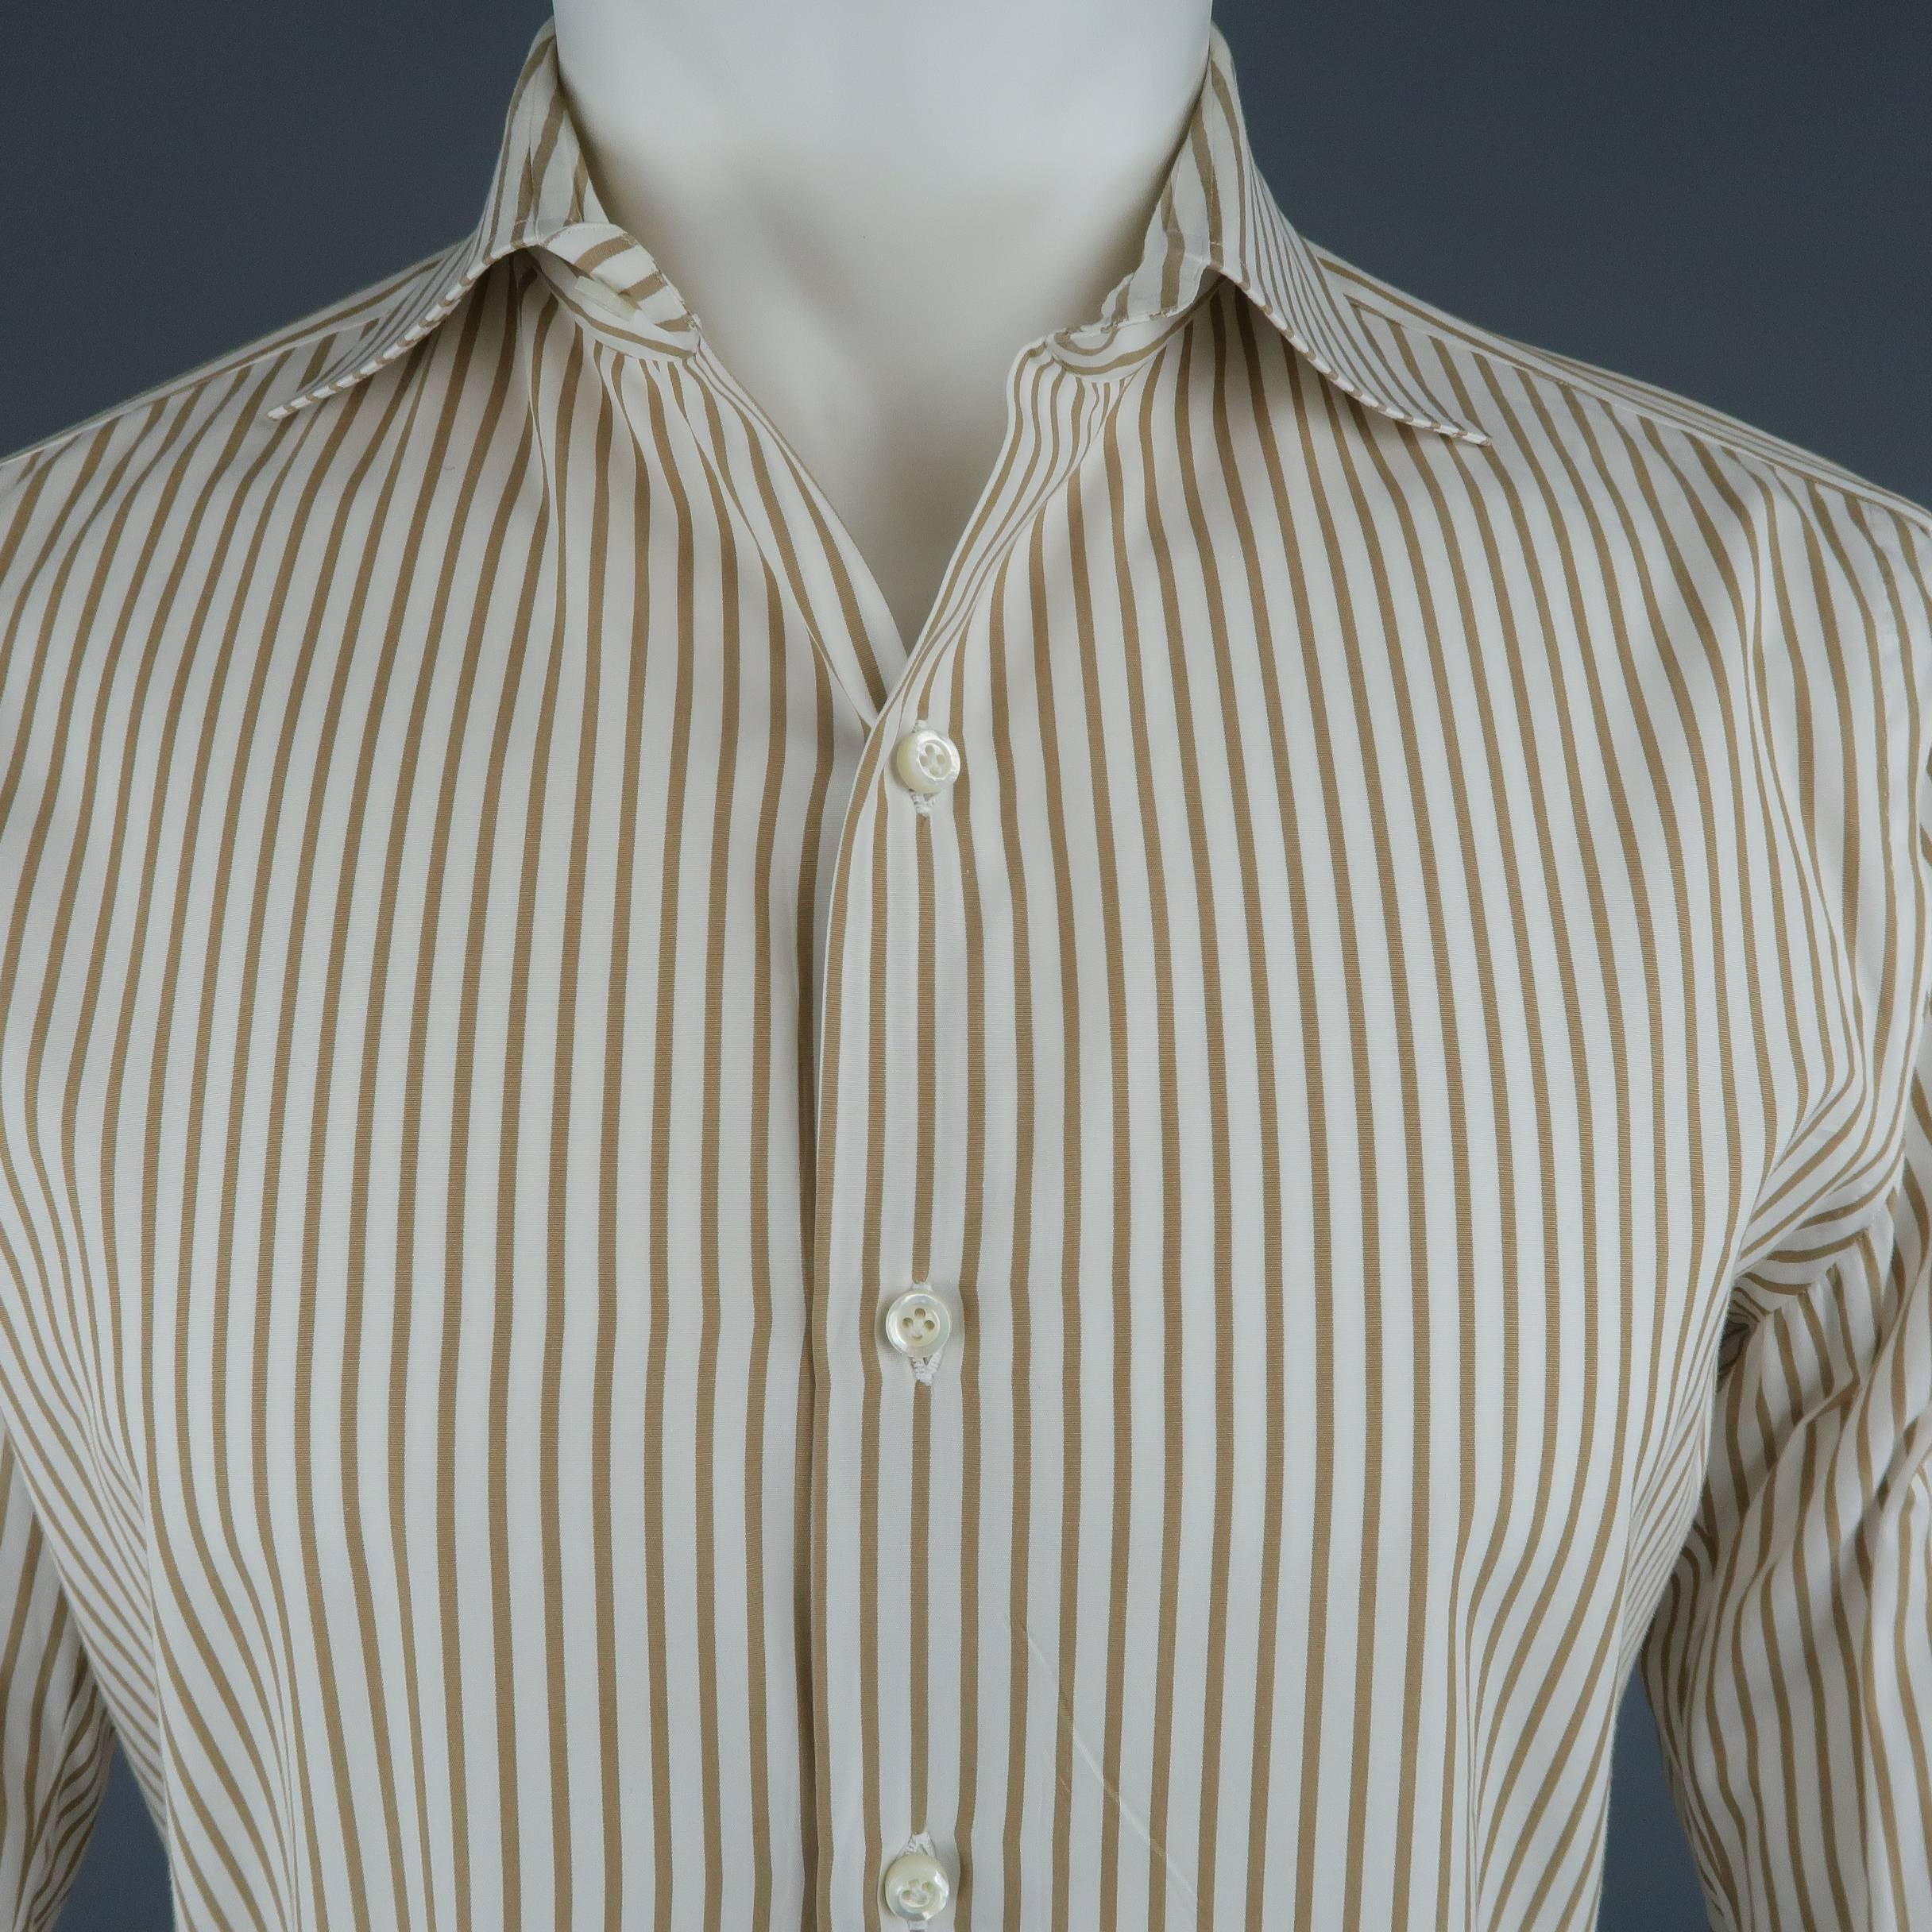 Classic dress shirt comes in khaki and white striped cotton with a spread collar. Made in Italy.
 
Good Pre-Owned Condition.
Marked: 15.5/39
 
Measurements:
 
Shoulder: 16.5 in.
Chest: 43 in.
Sleeve: 24 in.
Length: 30 in.
